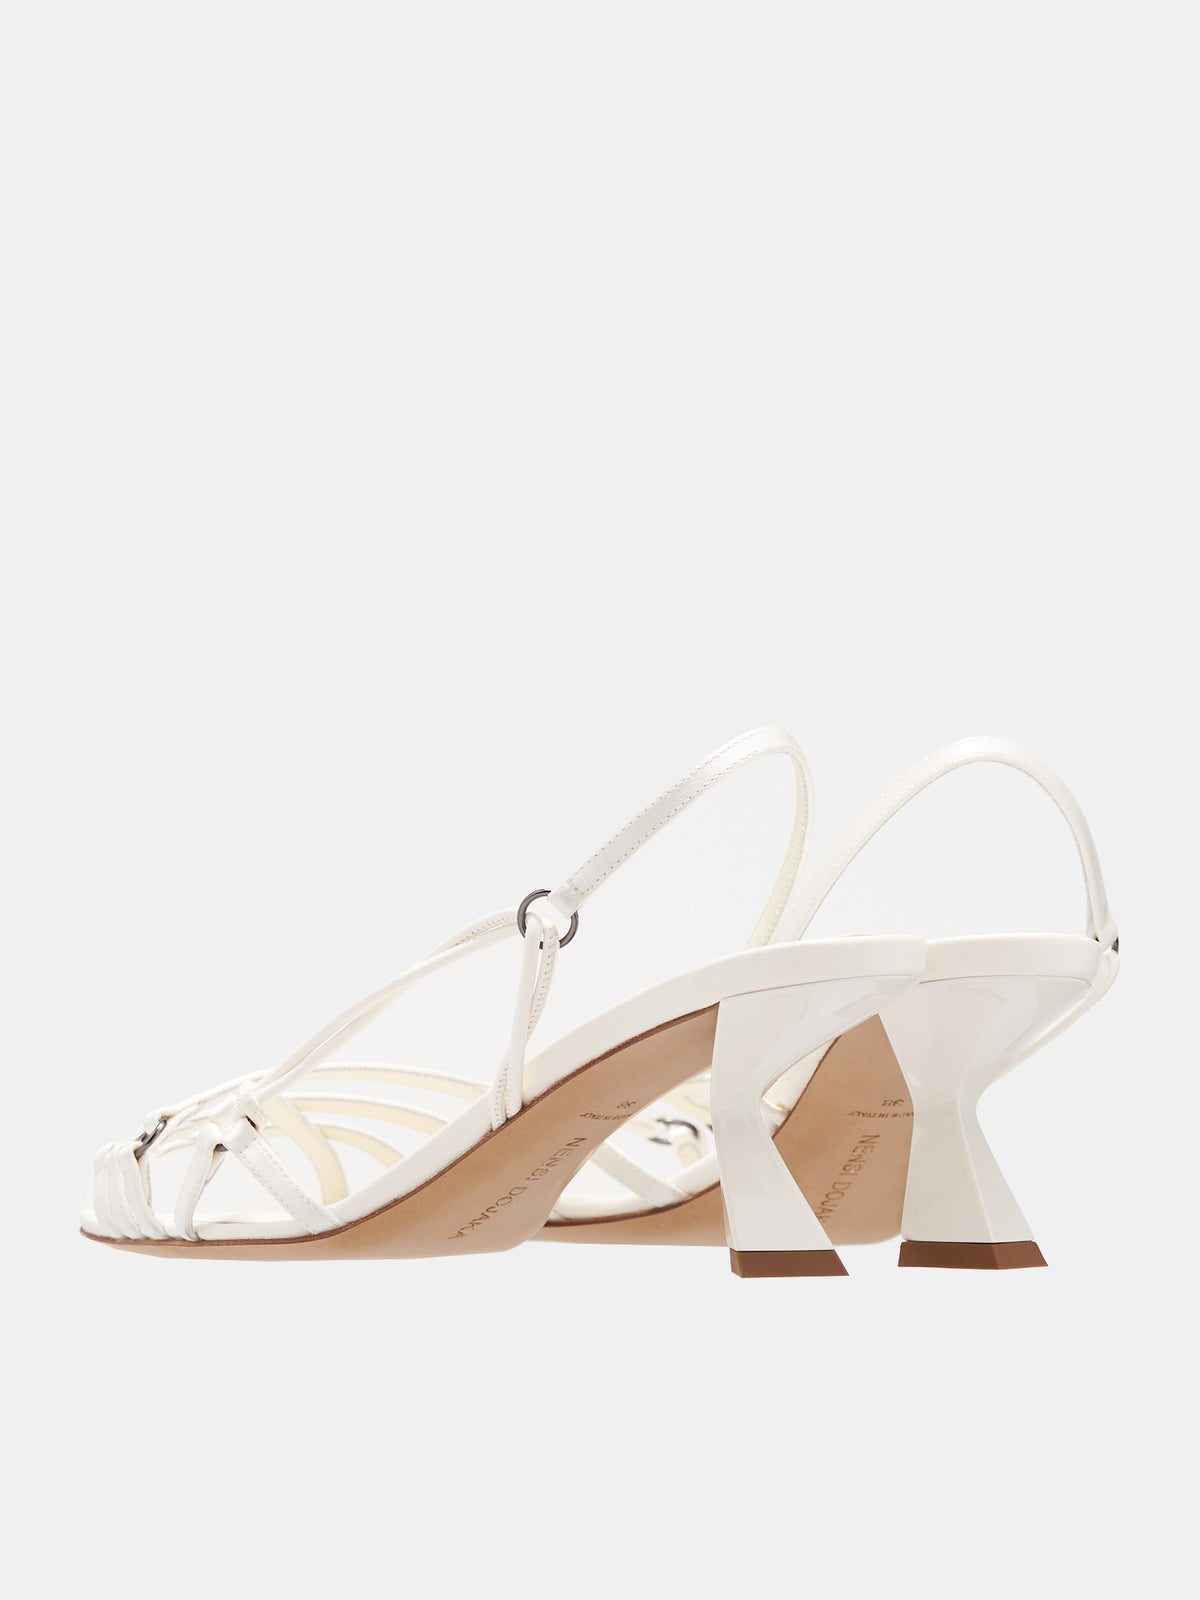 Low Heeled Sandals (PCW42025-OFF-WHITE)